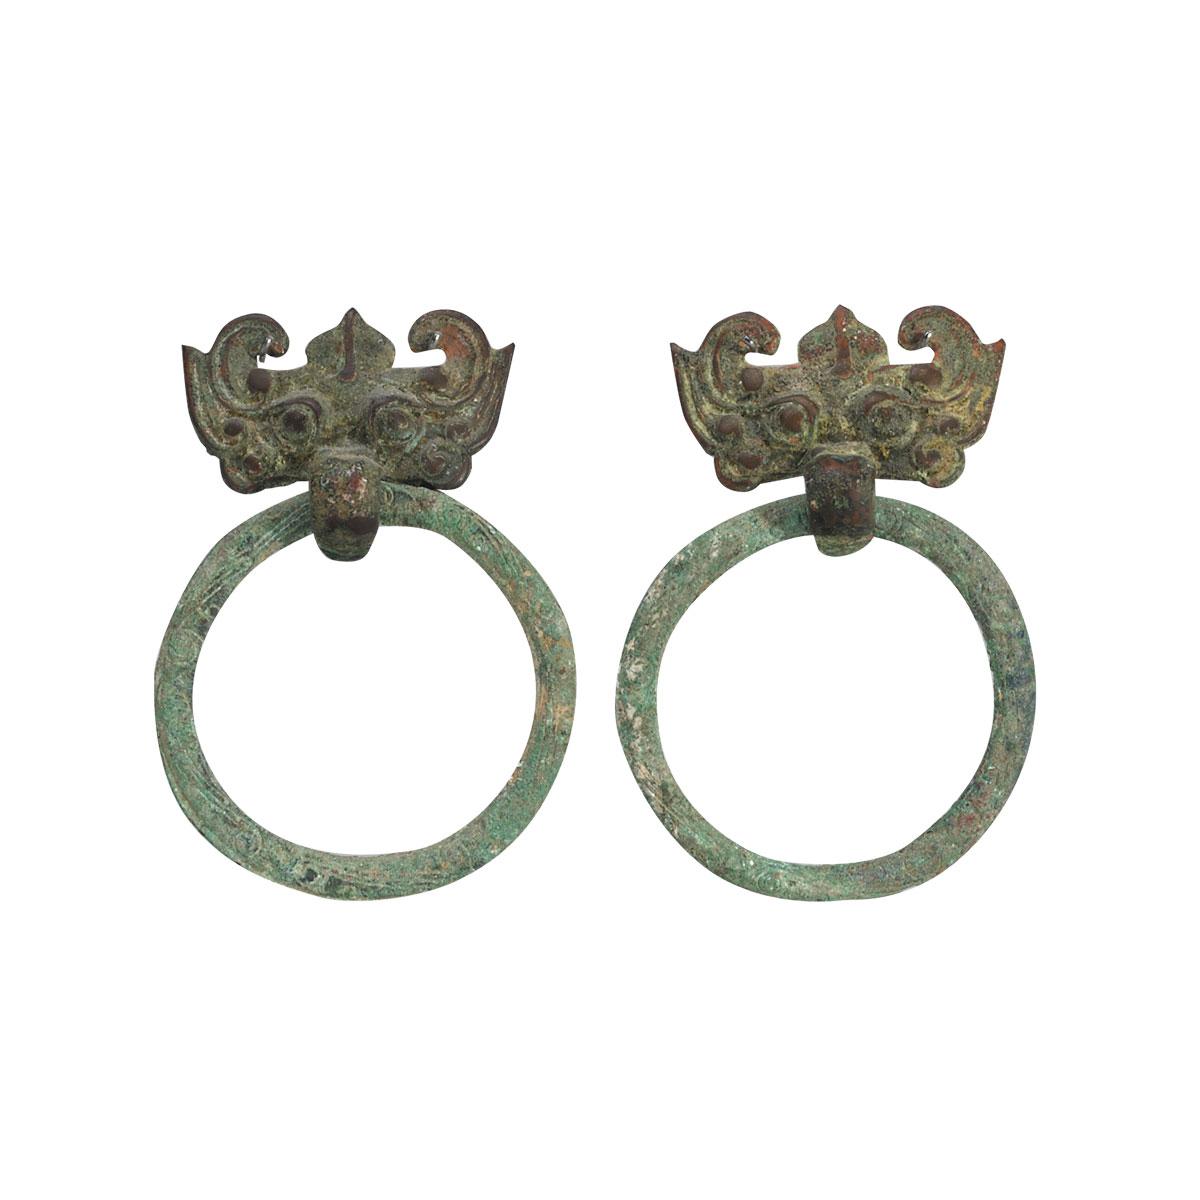 Pair of Bronze Taotie Mask and Ring Handles, Warring States Period, 5th to 3rd Century BC